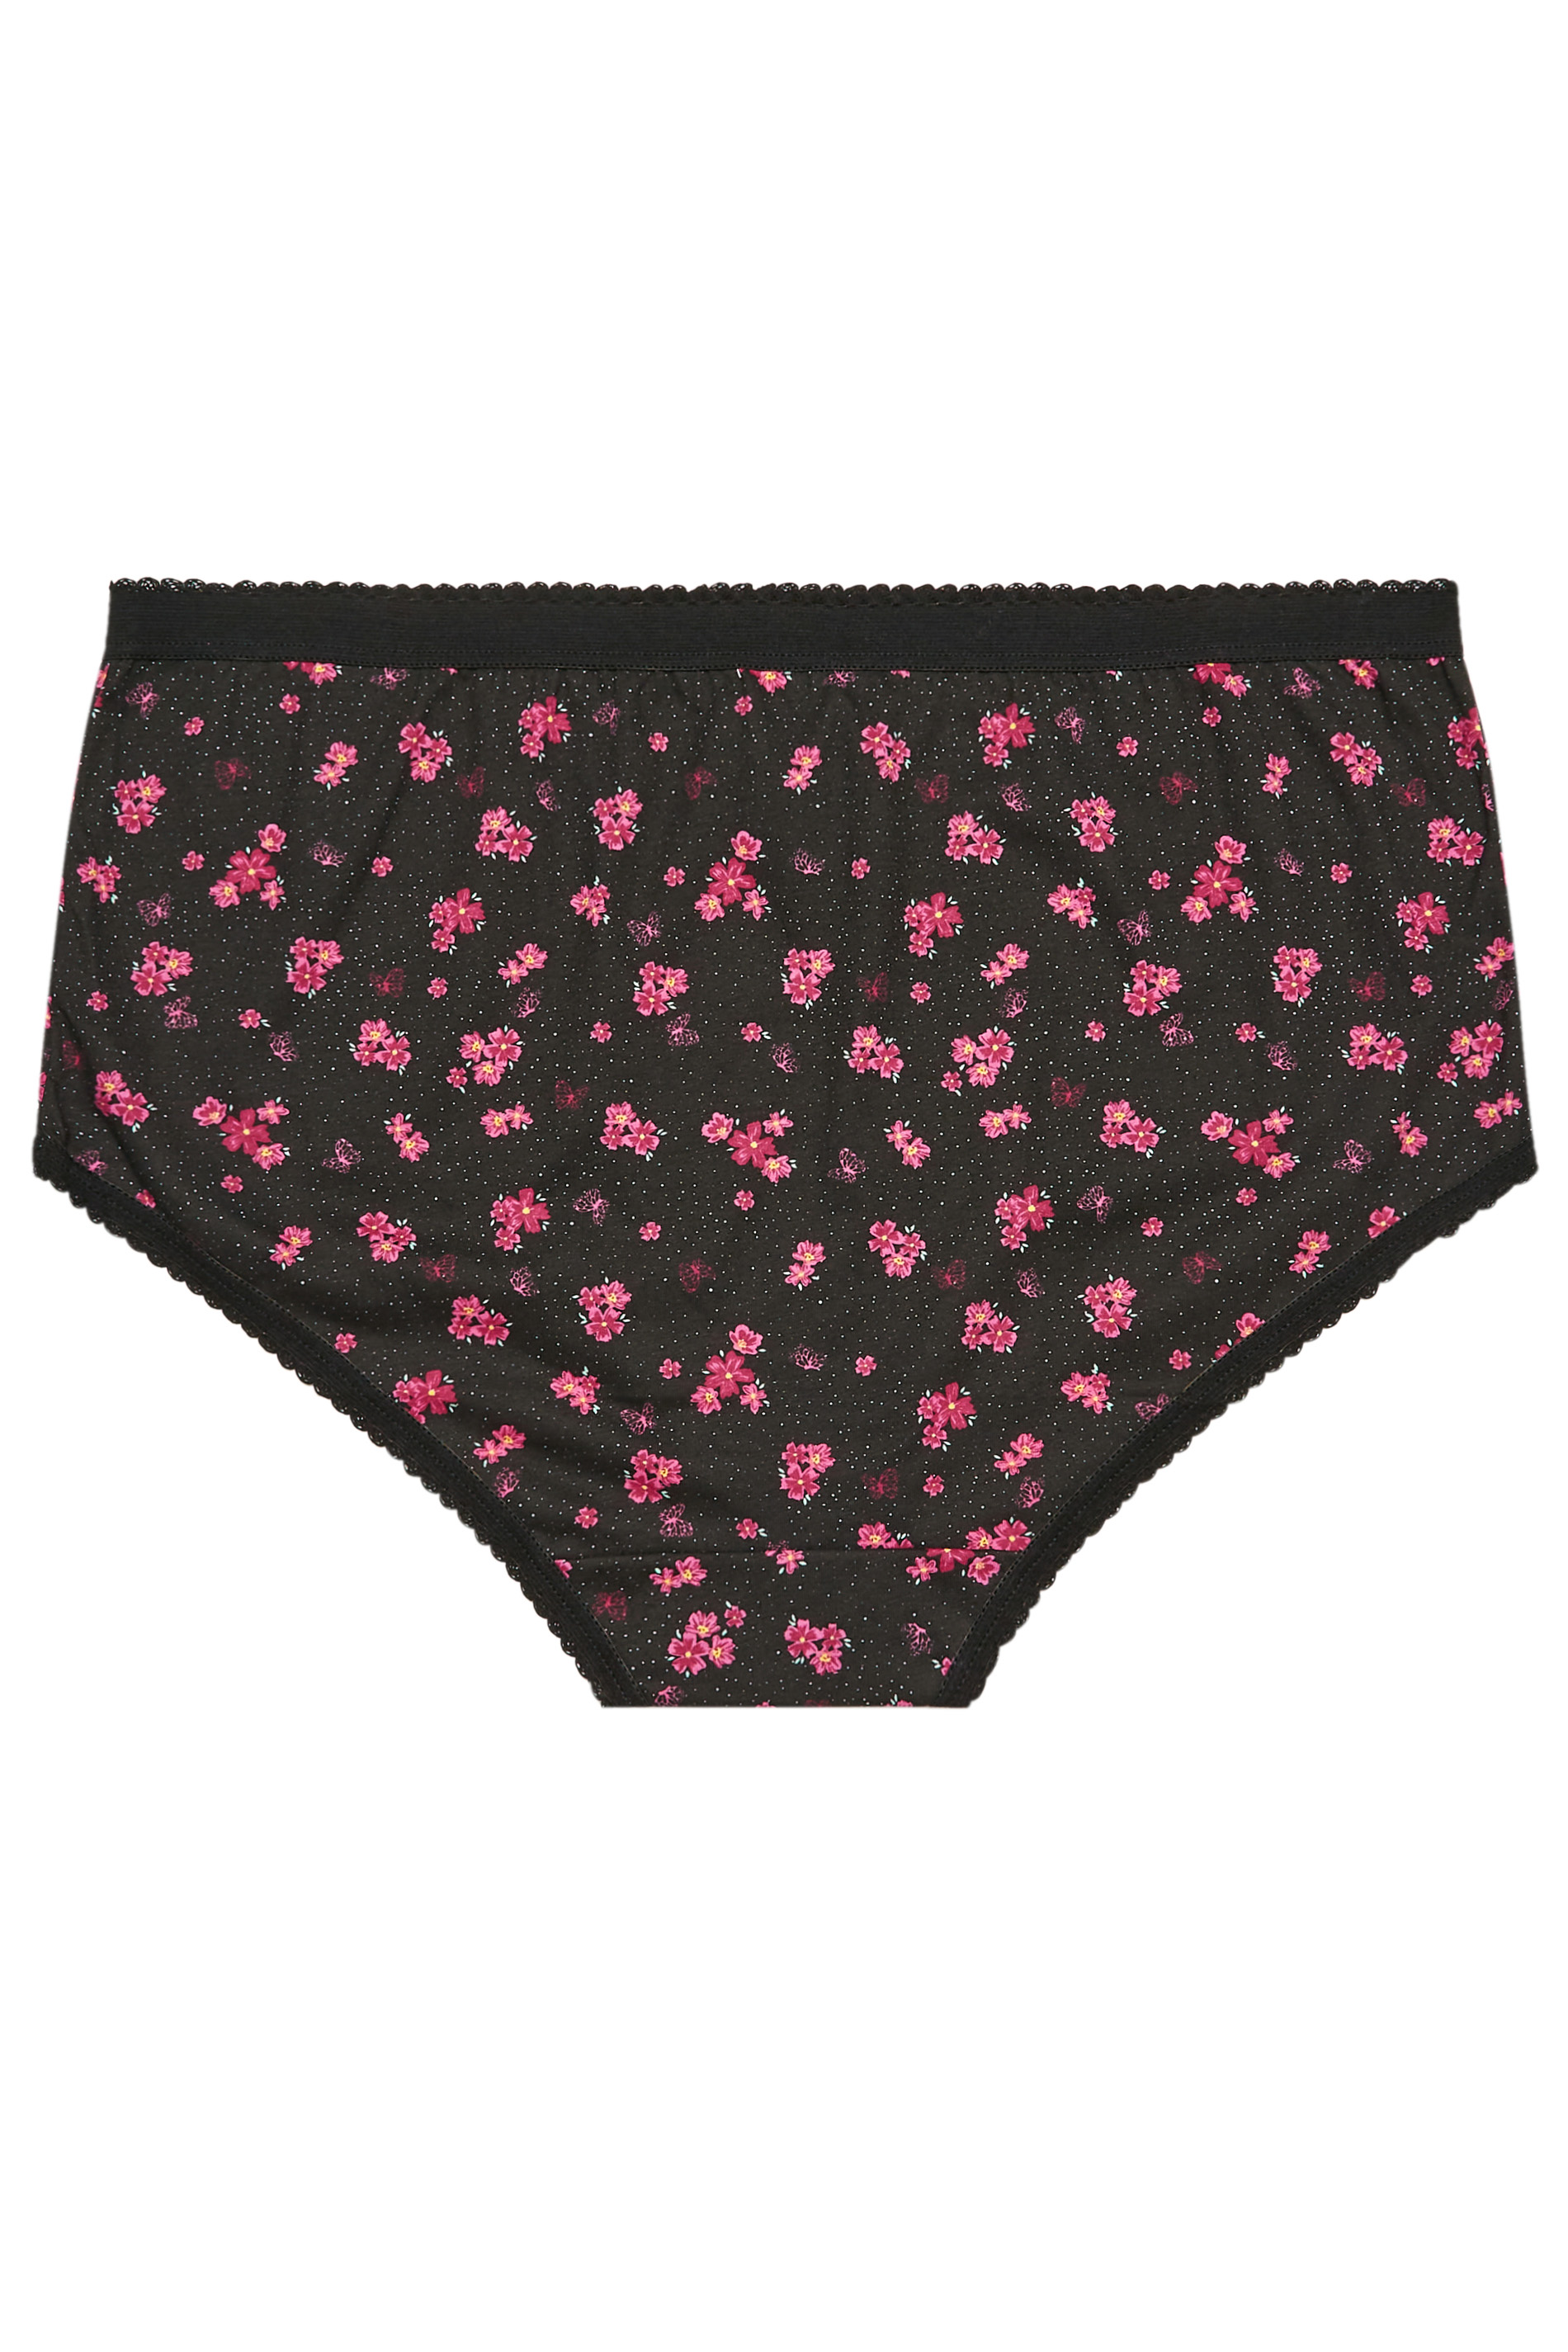 YOURS 5 PACK Plus Size Black & Pink Bow Print High Waisted Full